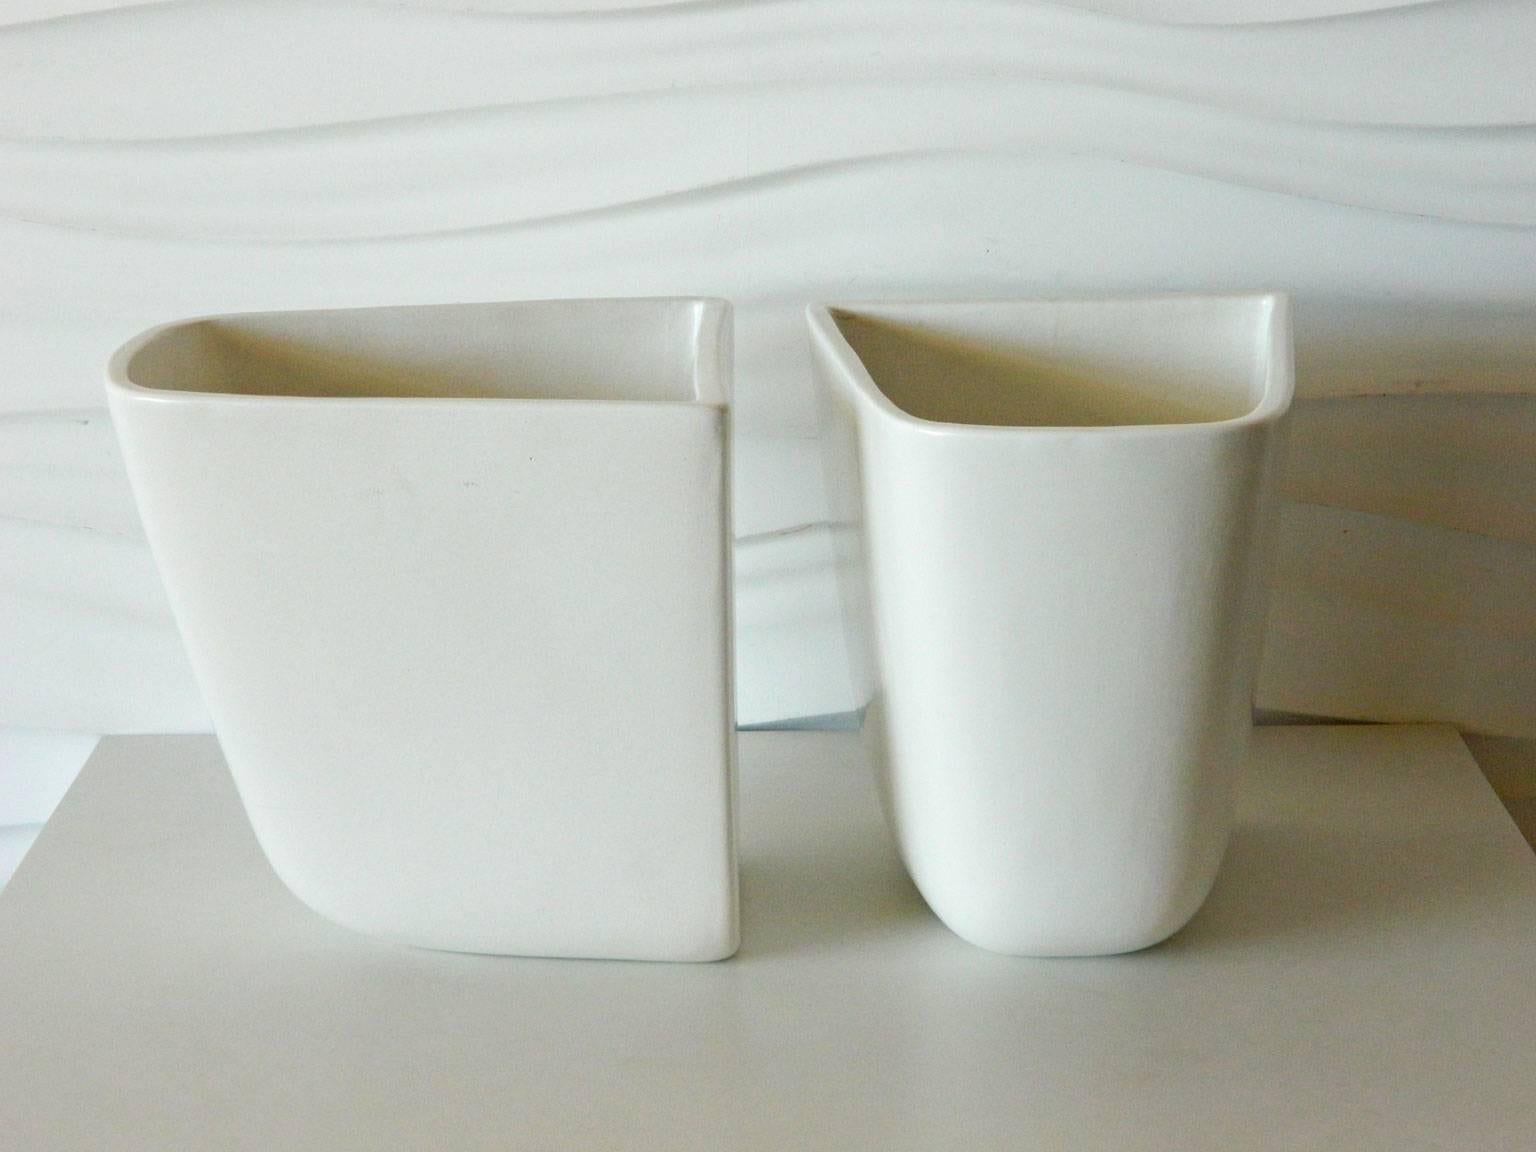 American Pair of Malcolm Leland Domino Planters for Architectural Pottery